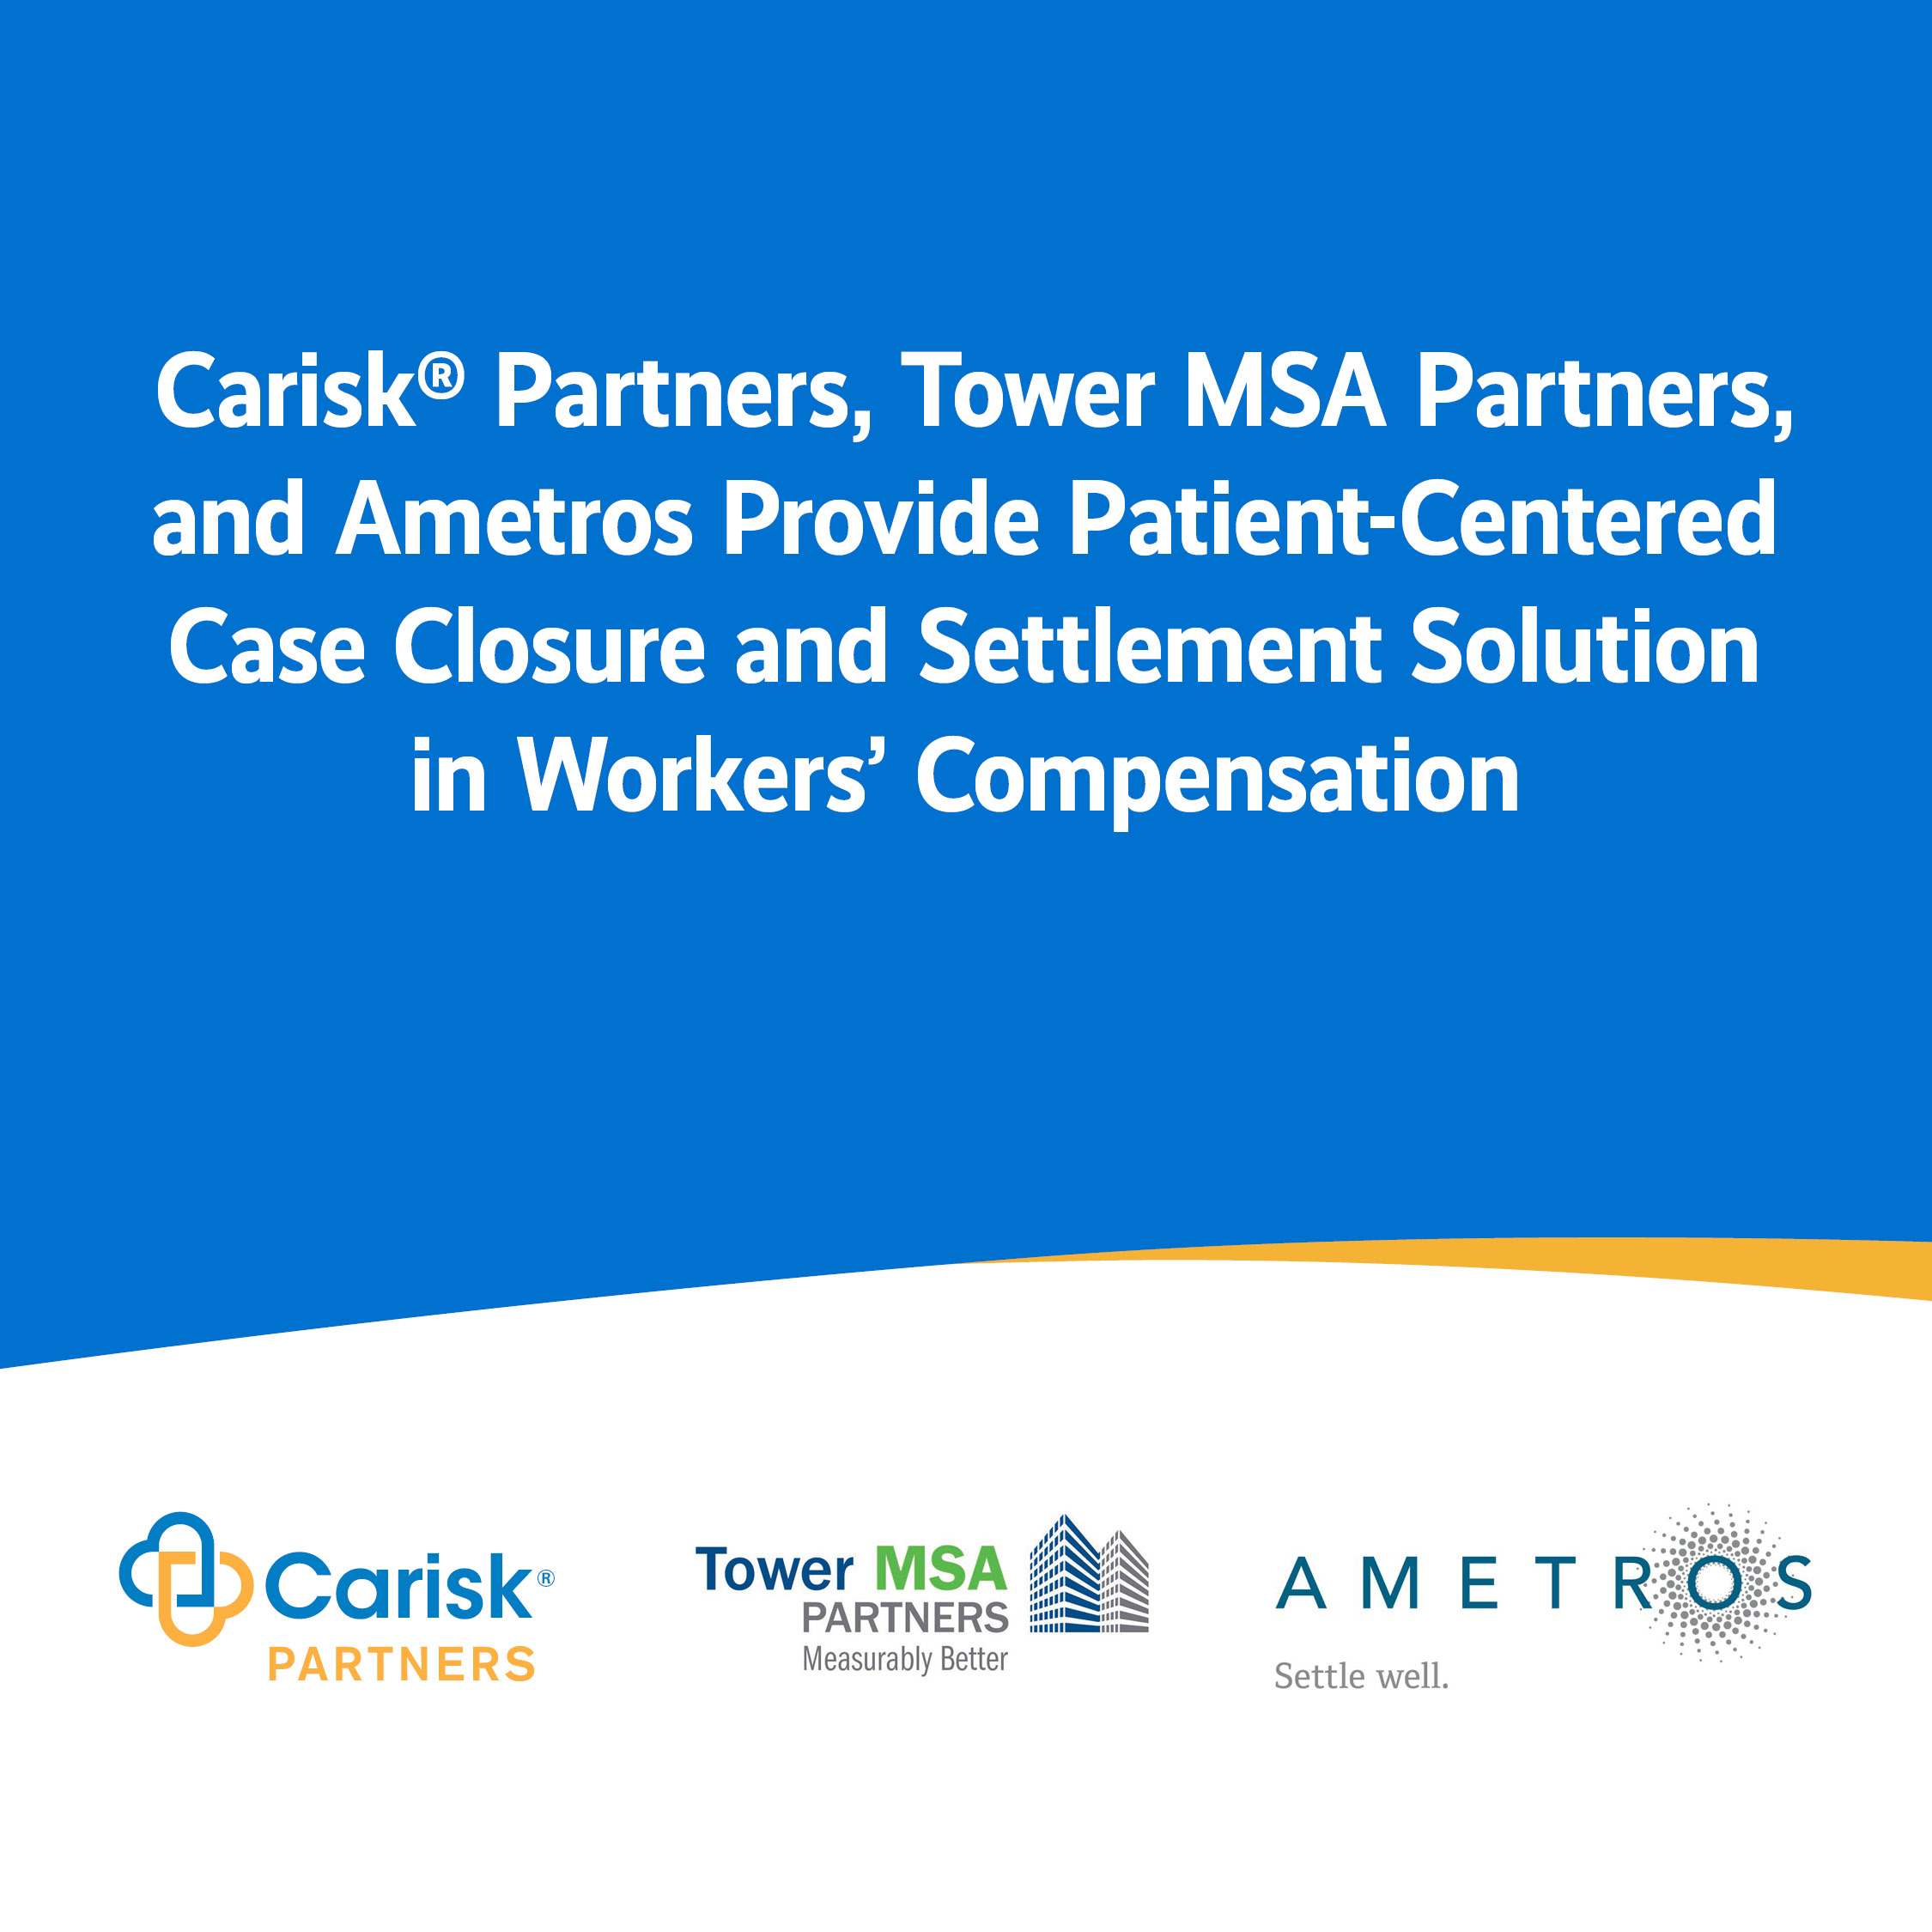 Carisk® Partners, Tower MSA Partners, and Ametros to Provide Patient-Centered Case Closure and Settlement Solution in Workers’ Compensation: Improves Quality of Life and Patient Engagement